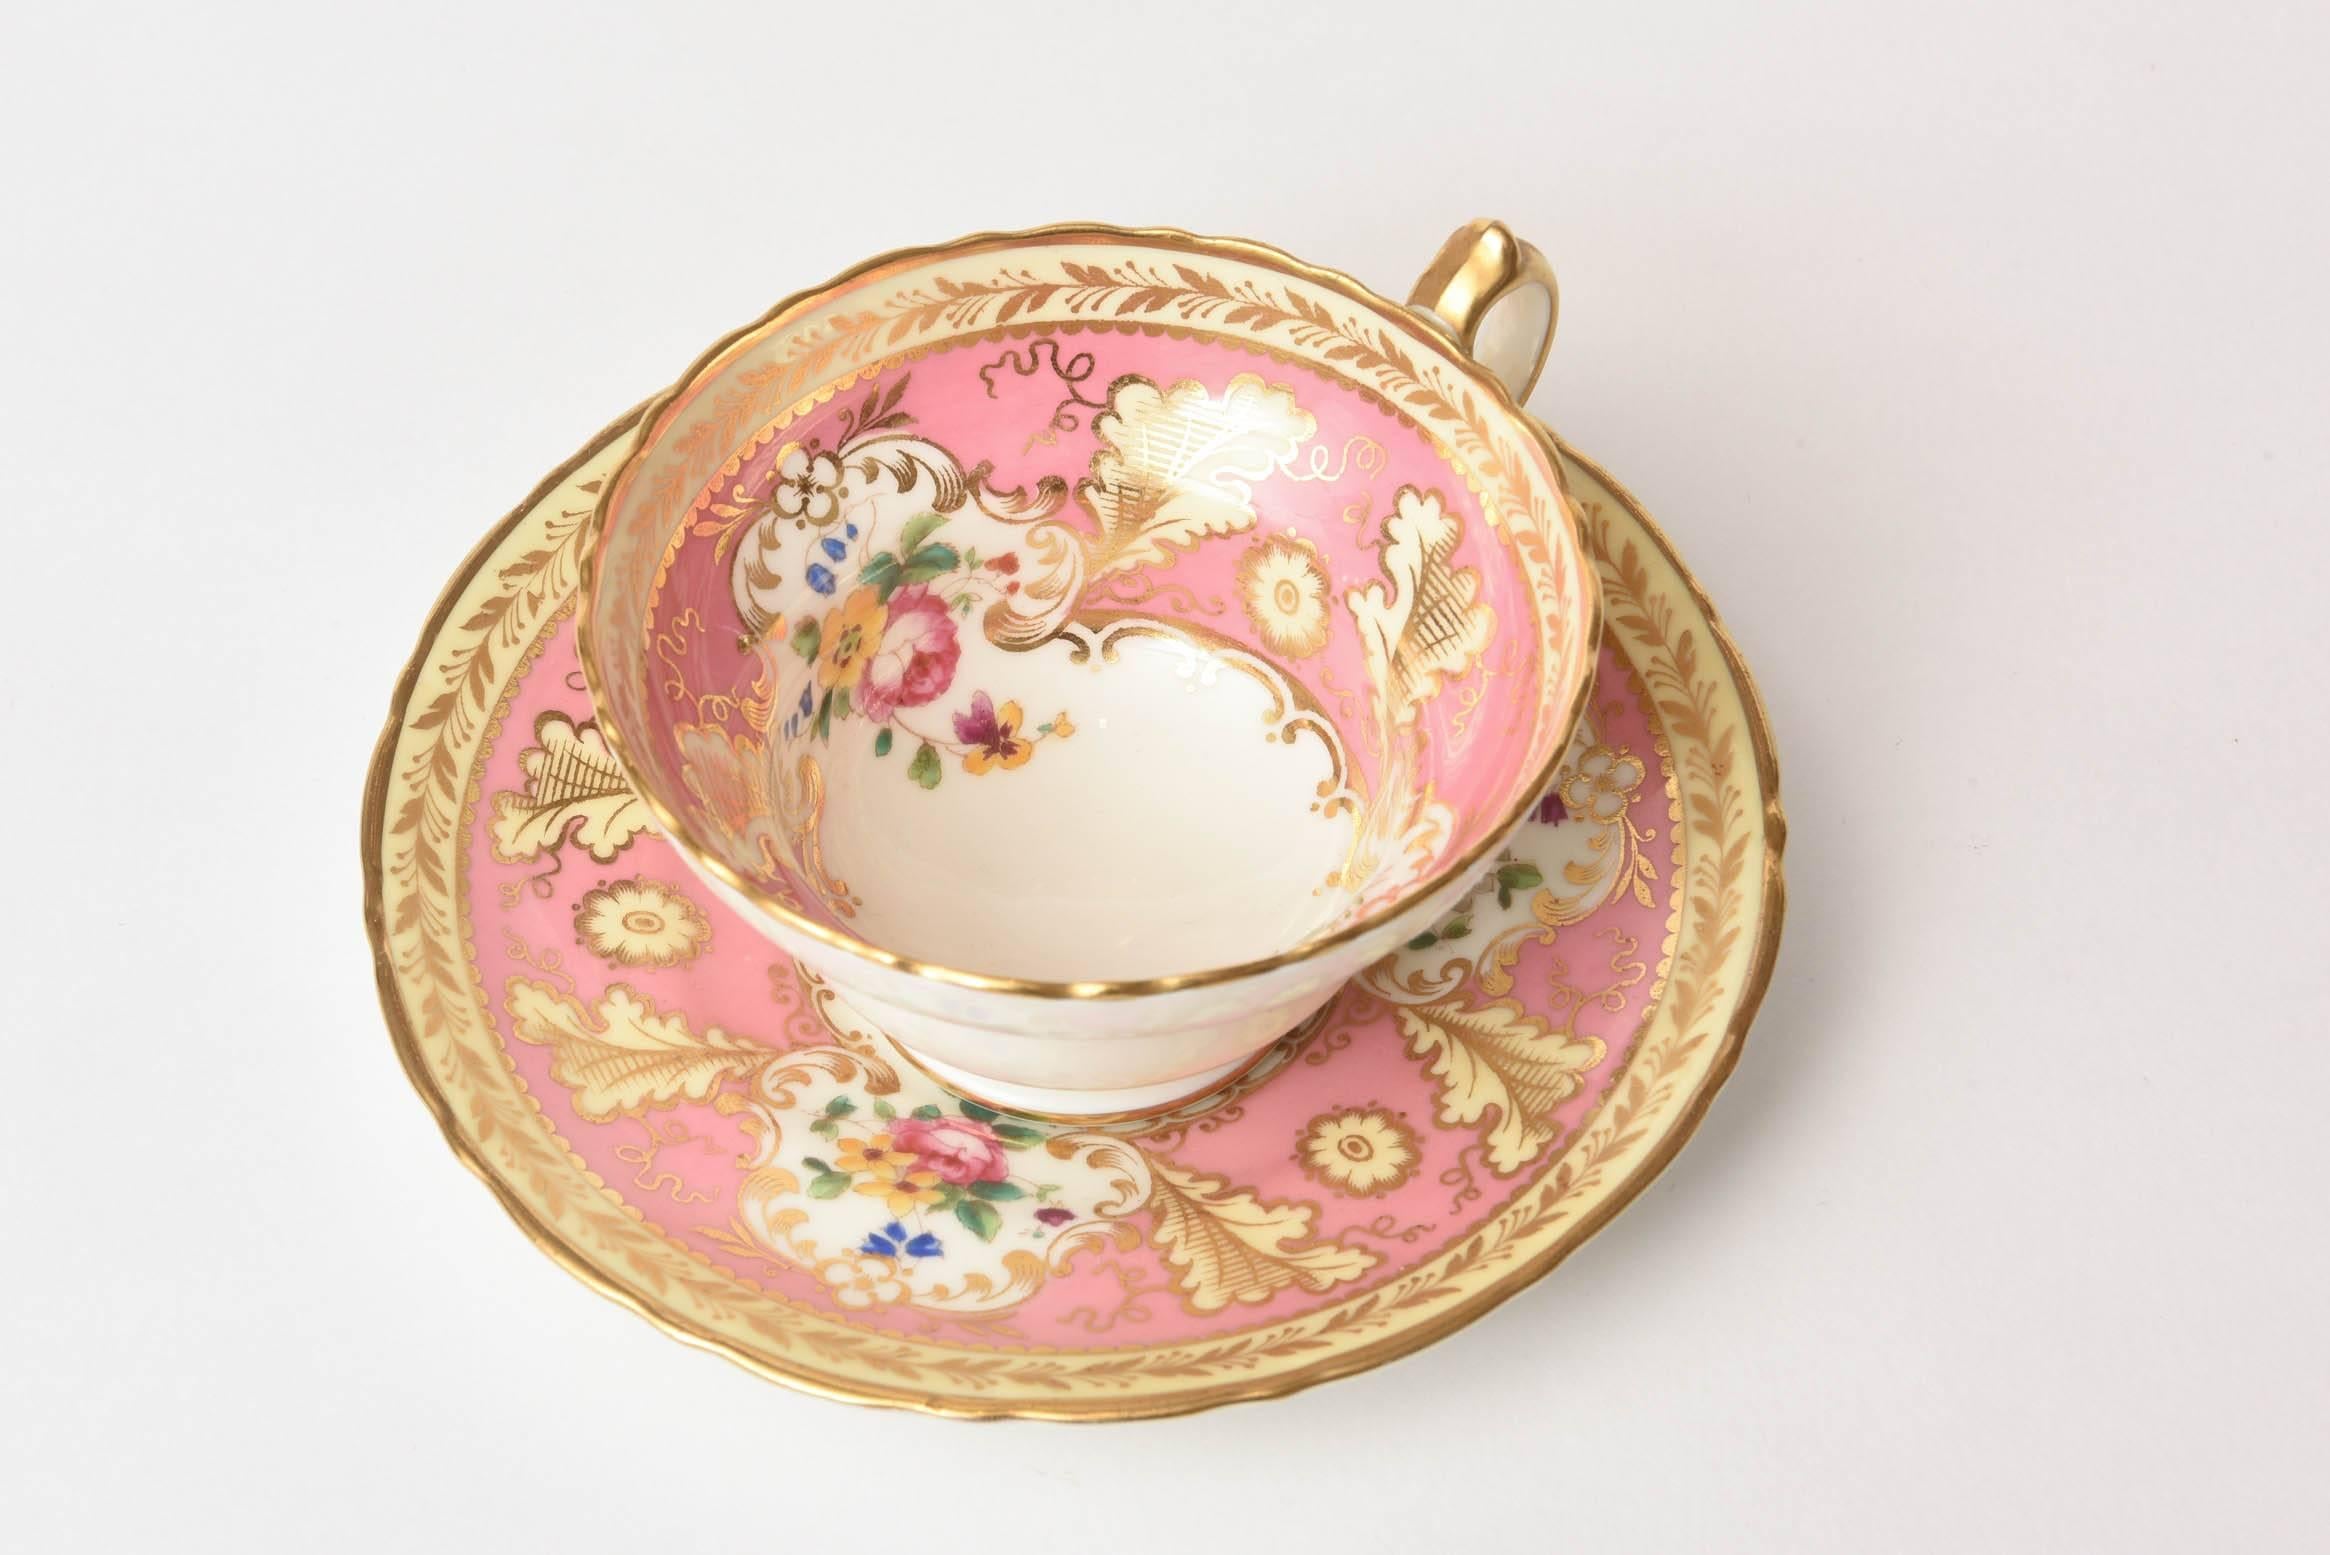 A darling set by Cauldon, England featuring hand-painted floral cartouches in a pretty pink ground and trimmed with gold. This set also has a sweet ear shaped handle and slight pedestal base. We have 10 sets total if you would like and this listing